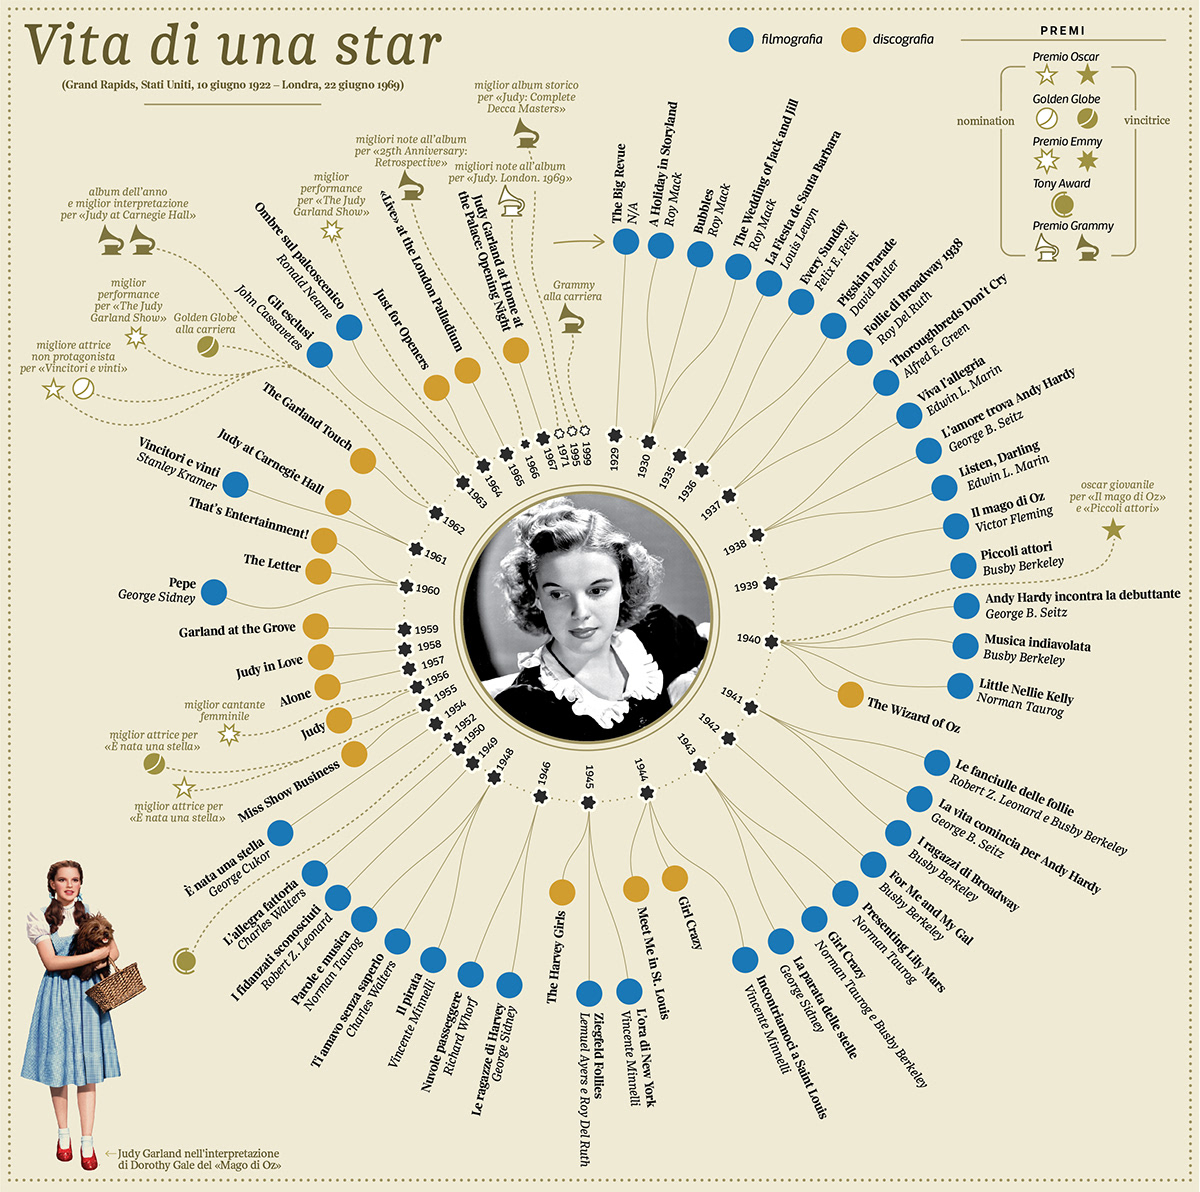 data visualization hollywood infographic information design judy garland Movies music oscar The Wizard of Oz visual data